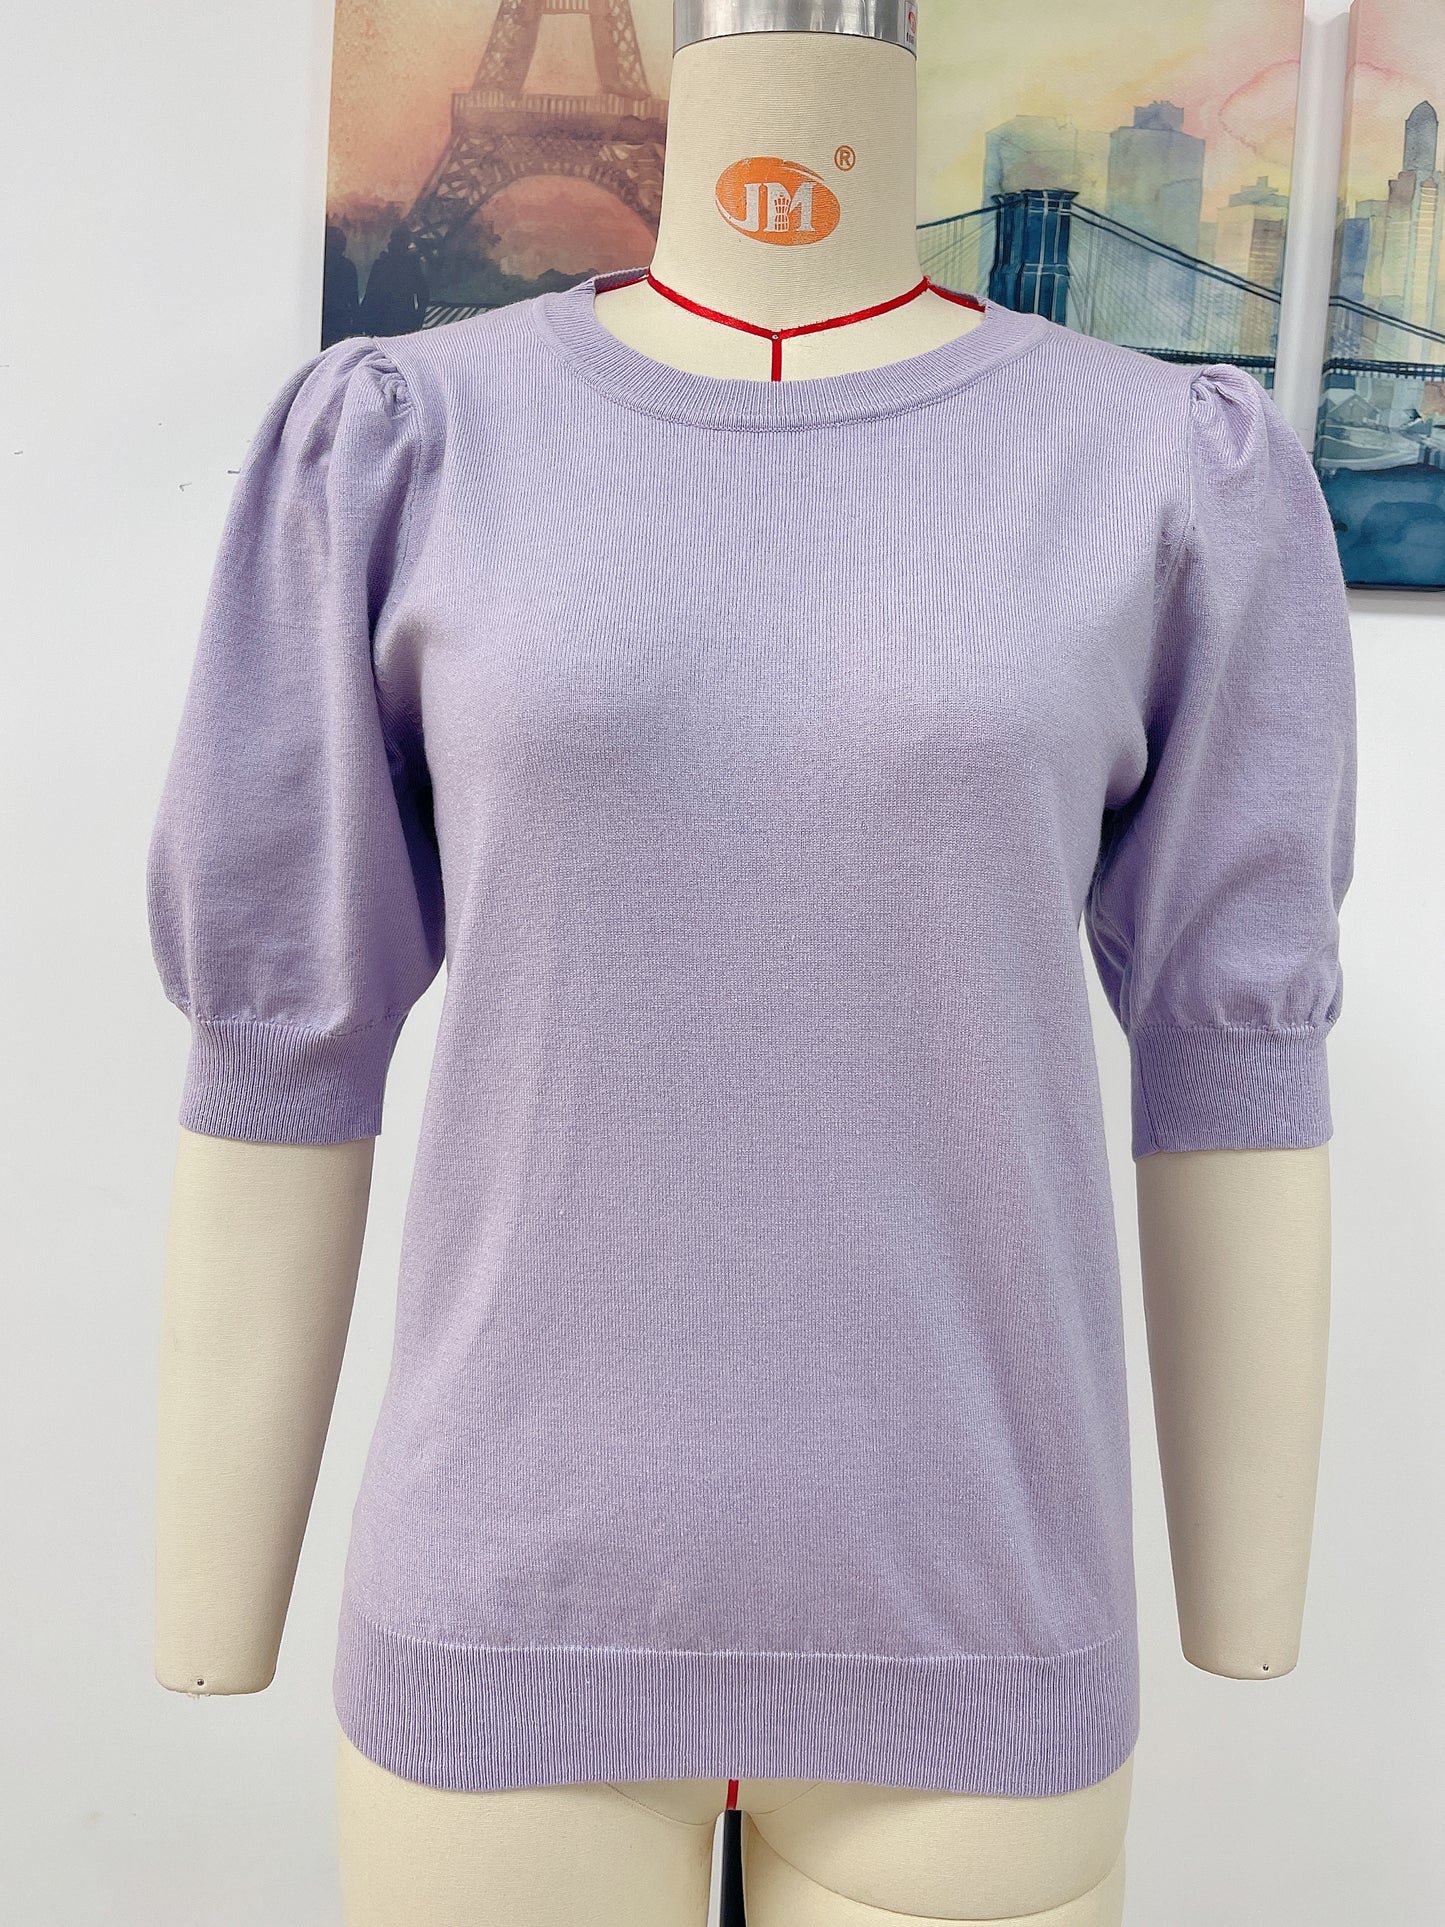 2023 Fashion Trends | Lilac Lavender Viscose Knitted Top